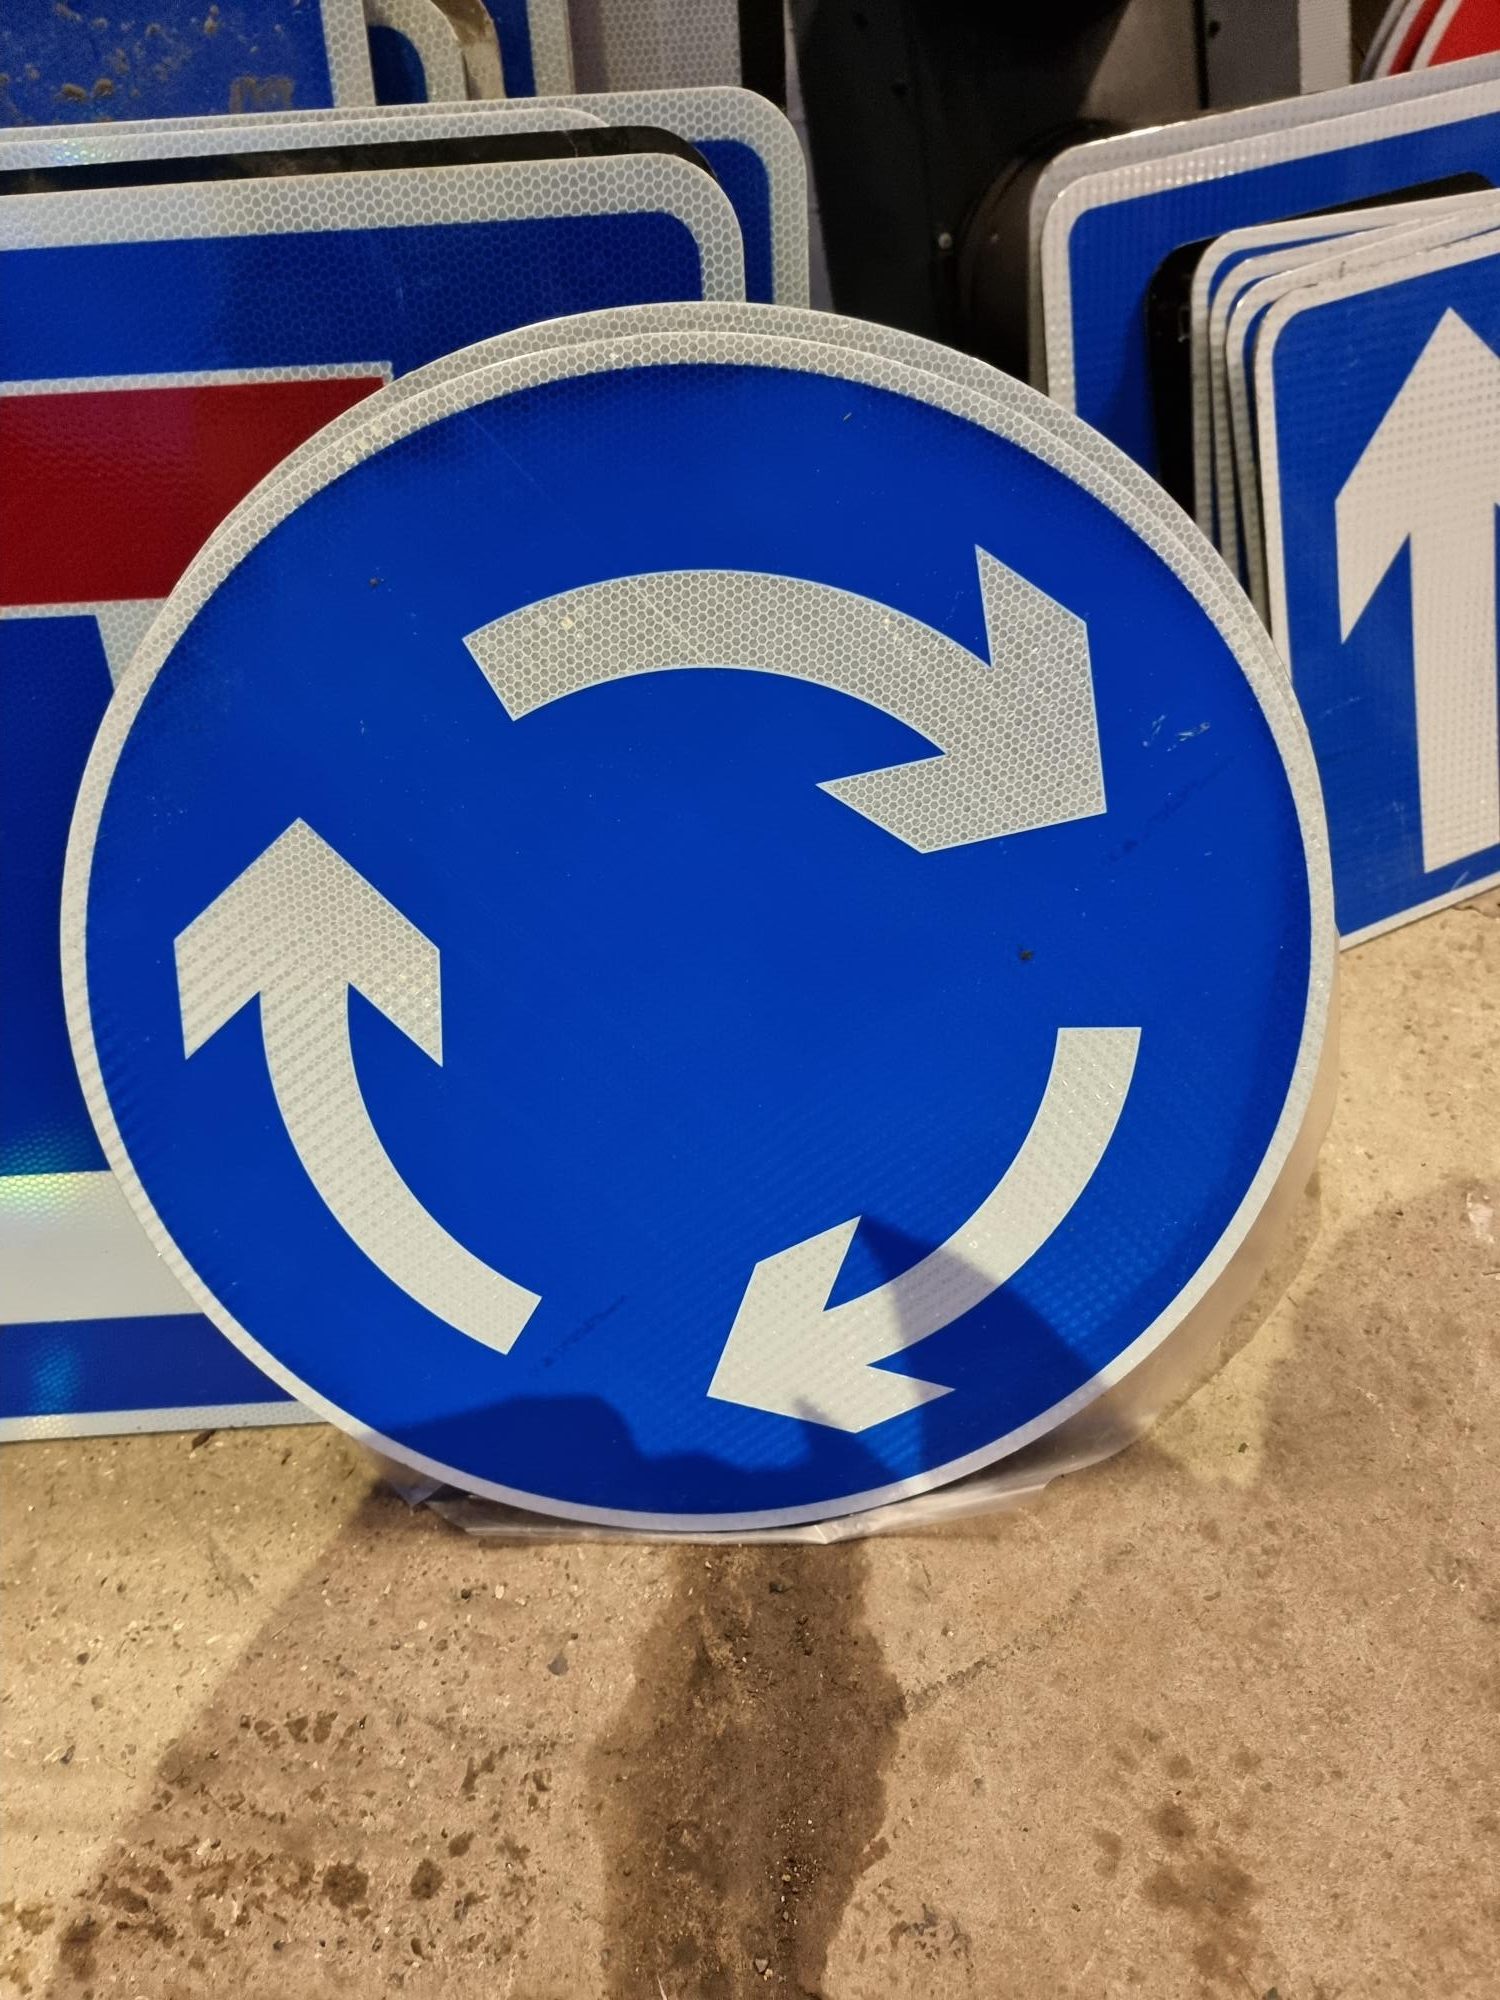 Roundabout – Road and Traffic Signs